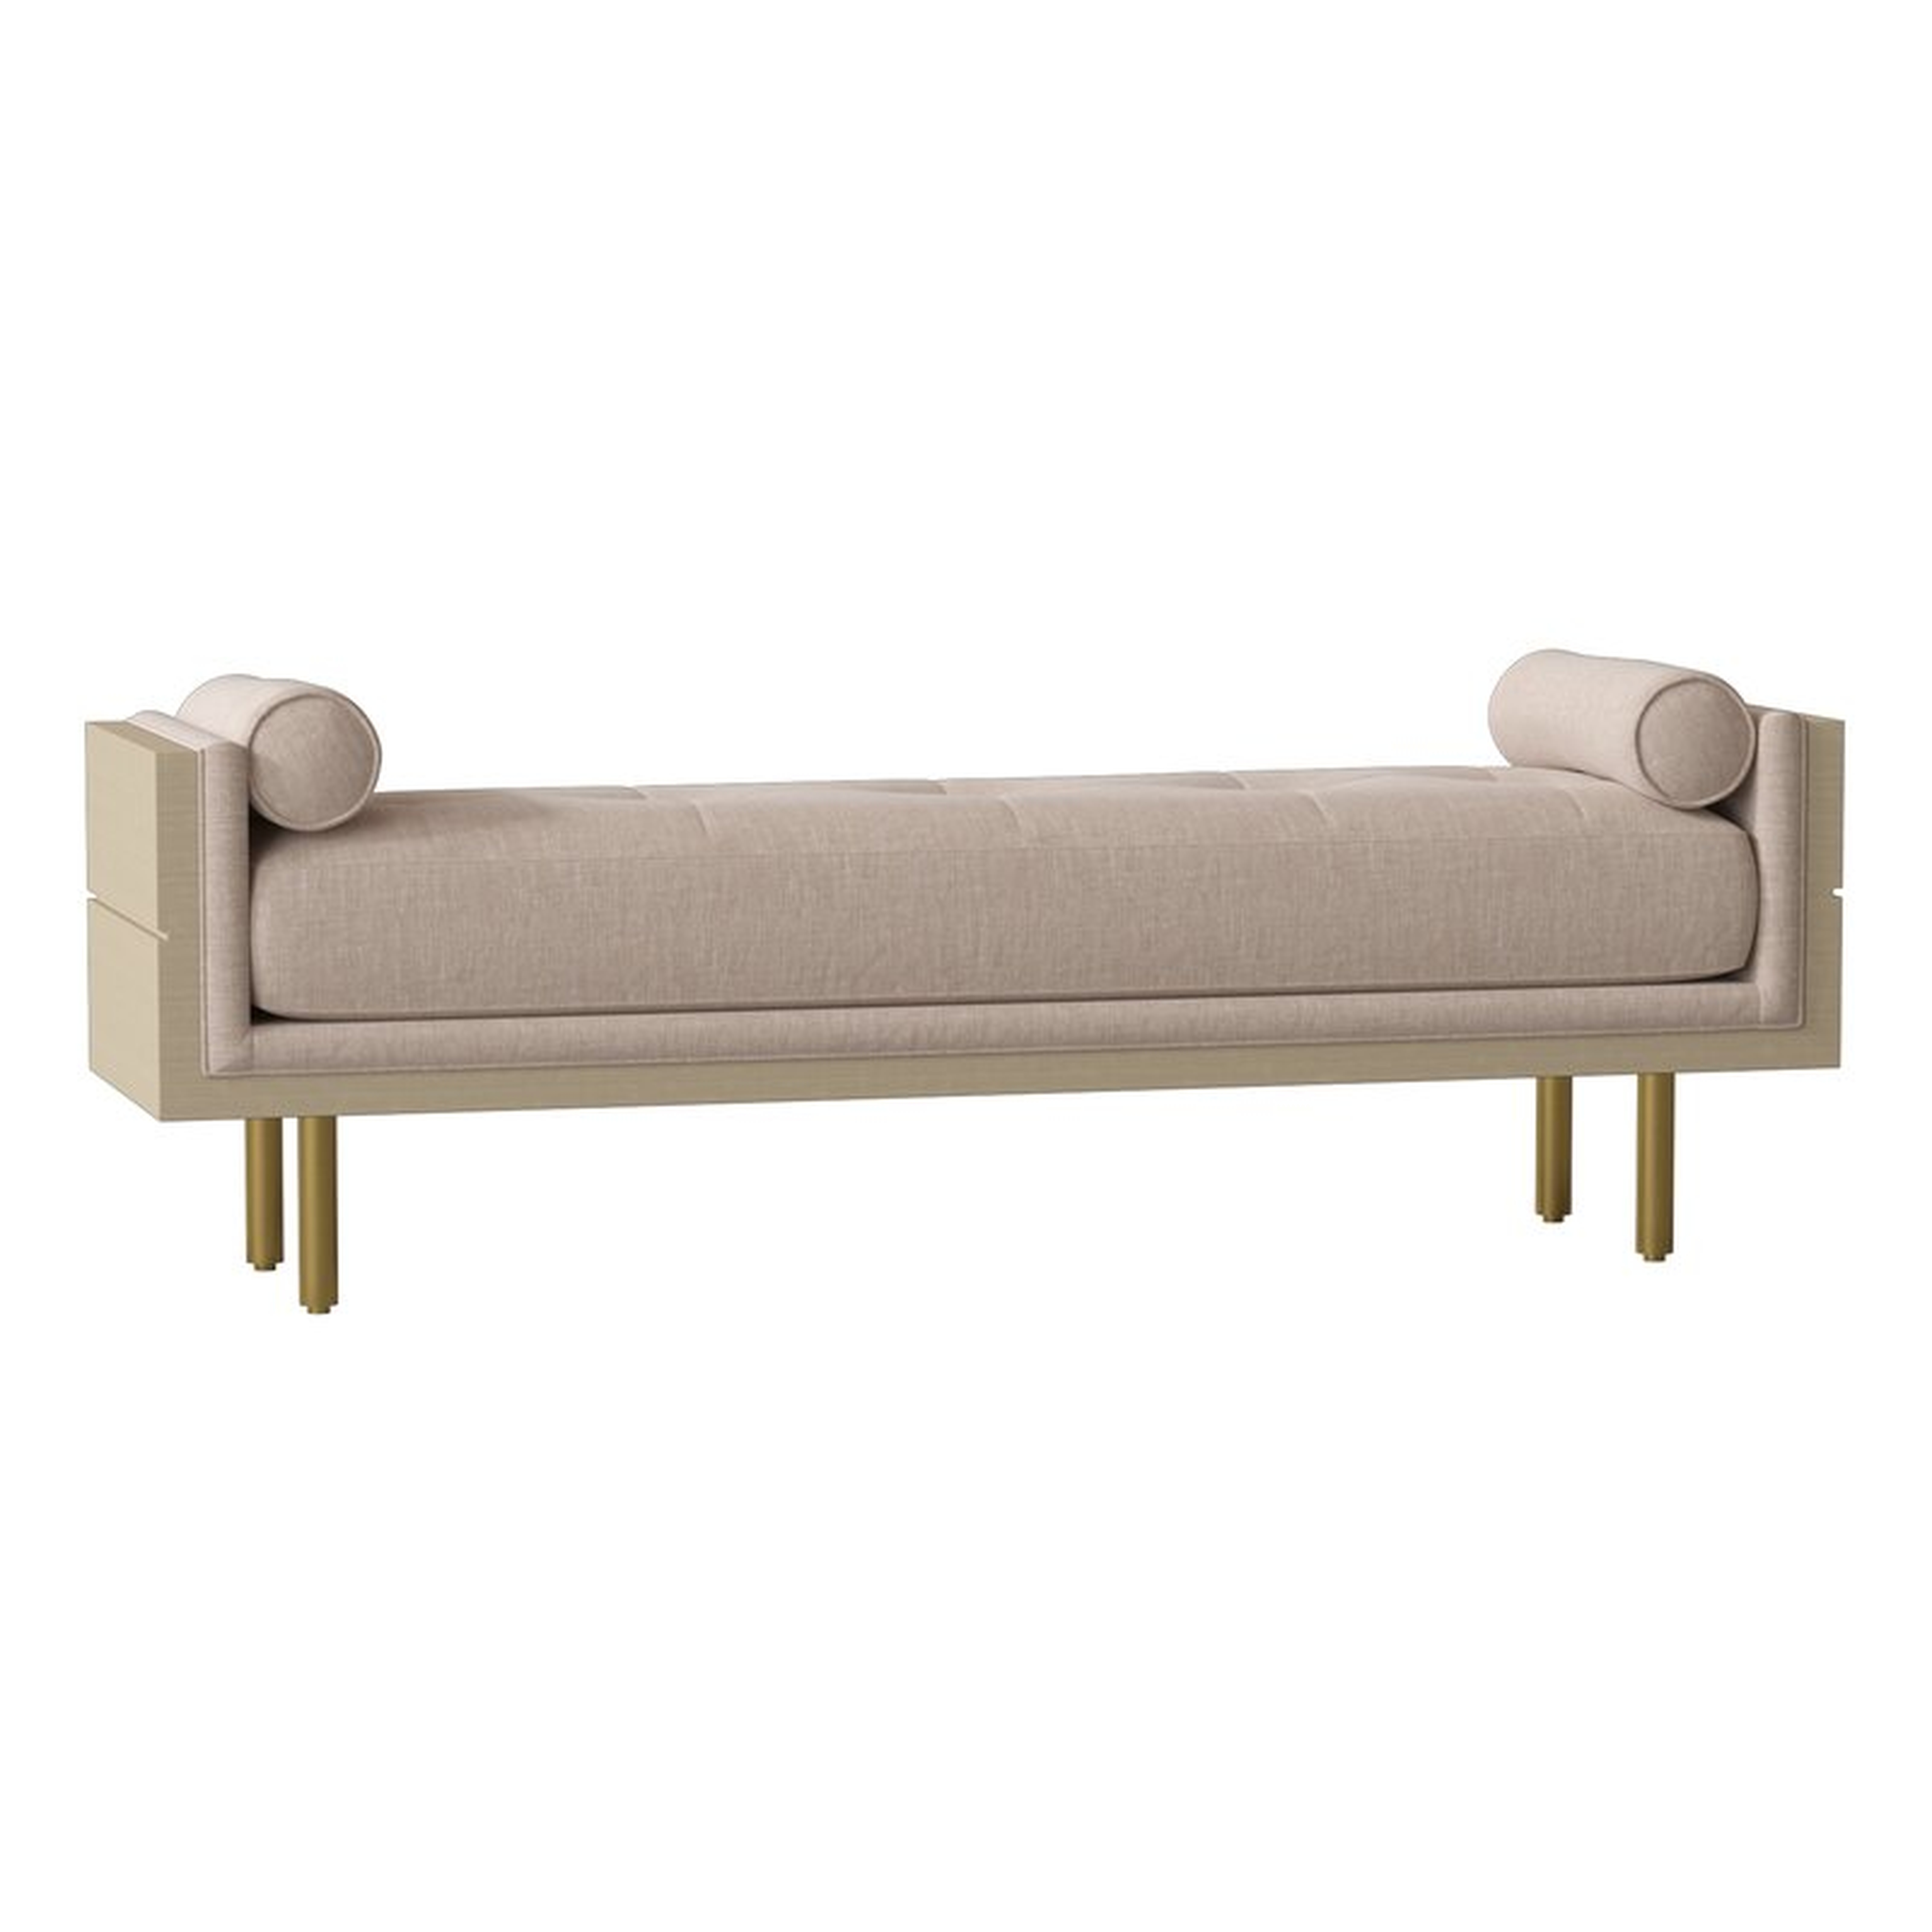 Maxwell Upholstered Bench - Perigold